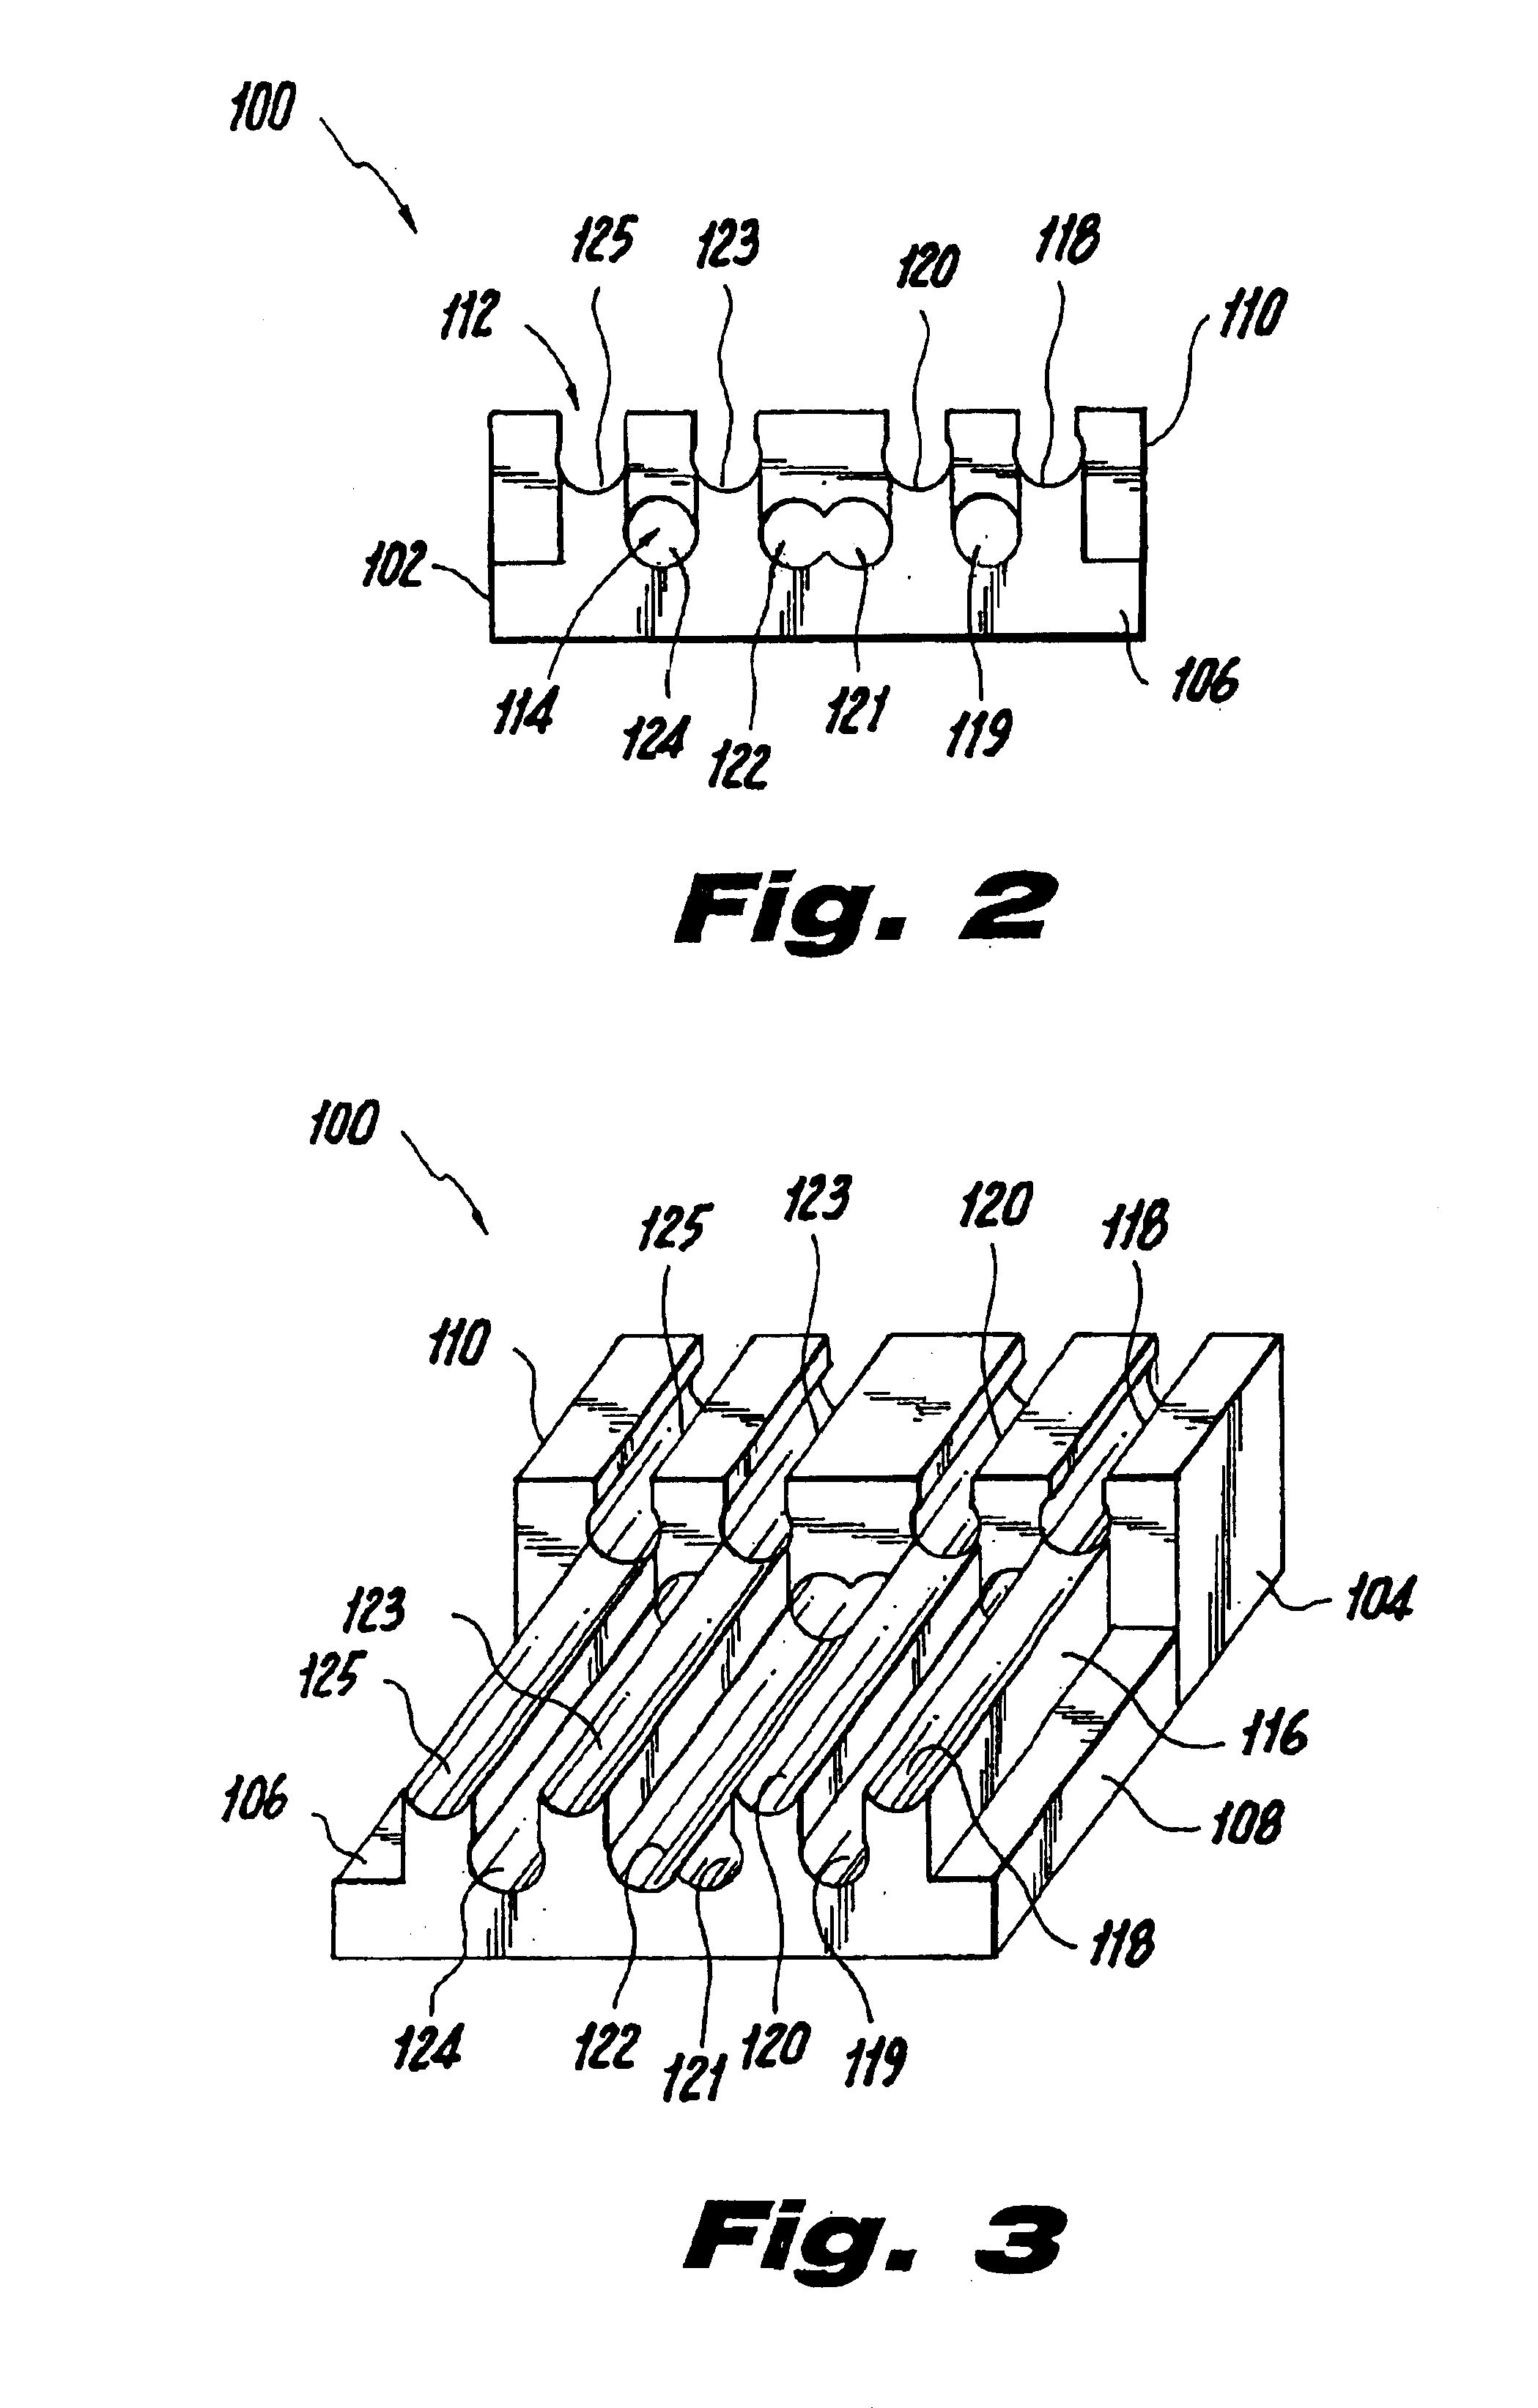 Wire guide sled hardware for communication plug